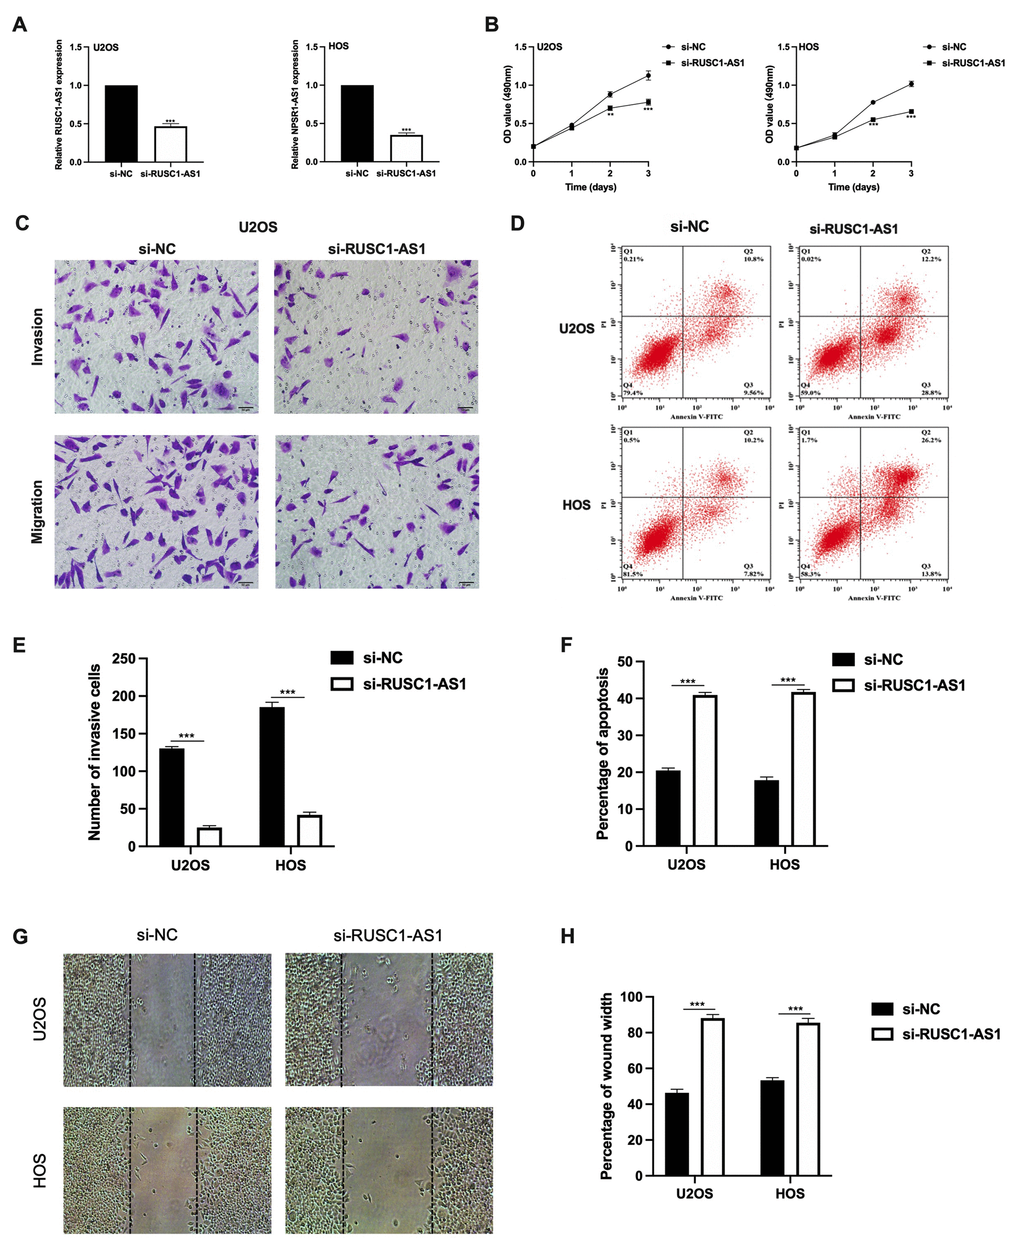 RUSC1-AS1 promoted cell viability, invasion and inhibits cell apoptosis in osteosarcoma cell lines. (A) RUSC1-AS1 expression after si-RUSC1-AS1 or si-NC transfection. (B) CCK-8 assay, (C, E) transwell invasion assay, (D, F) flow cytometry apoptosis assay, and (G, H) wound healing assay in U2OS and HOS cells after si-RUSC1-AS1 or si-NC transfection.